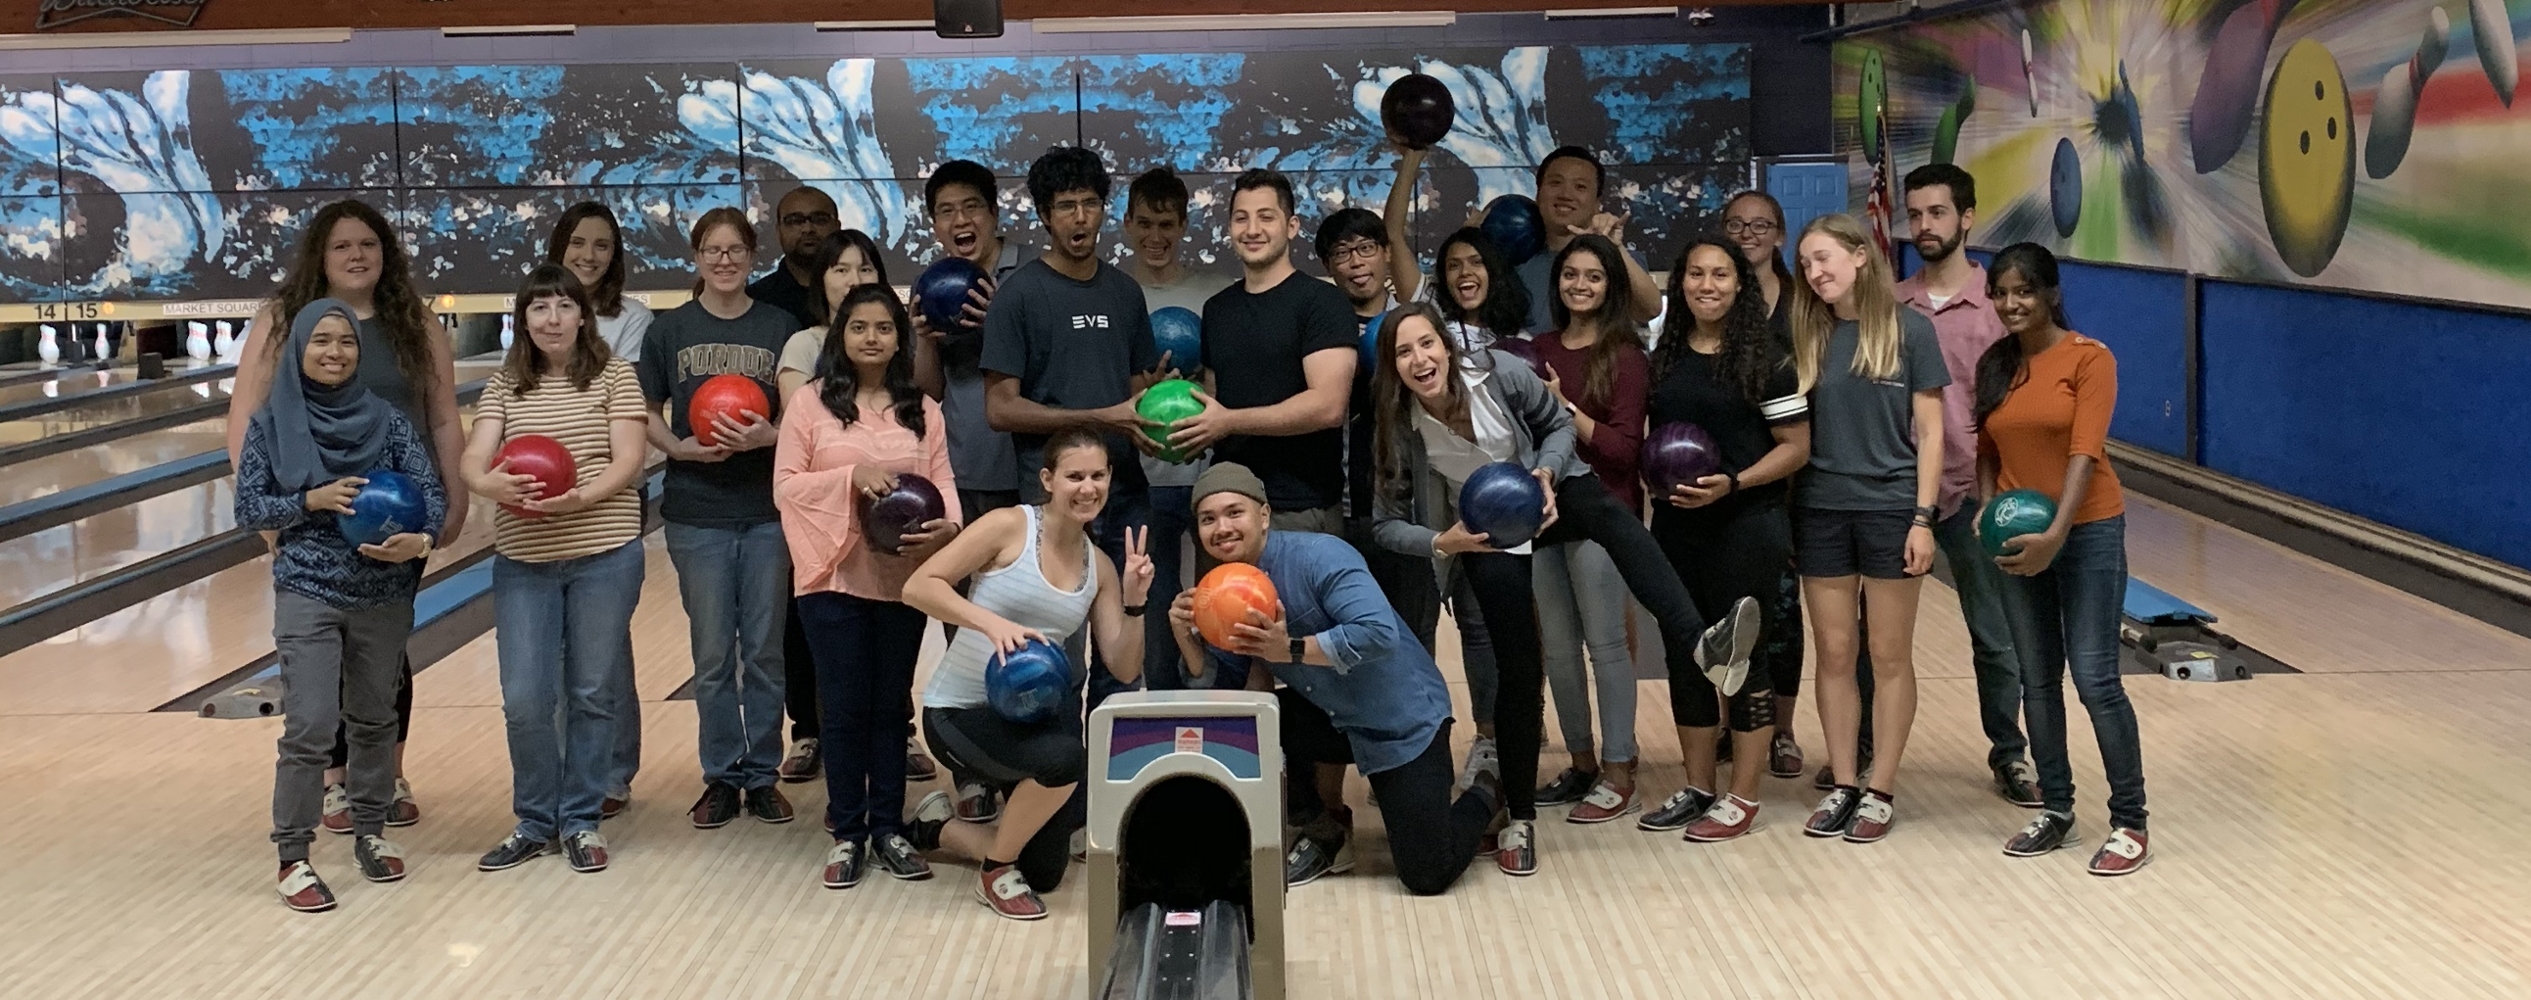 BGSA Members attending the Bowling Night during New Grad Orientation